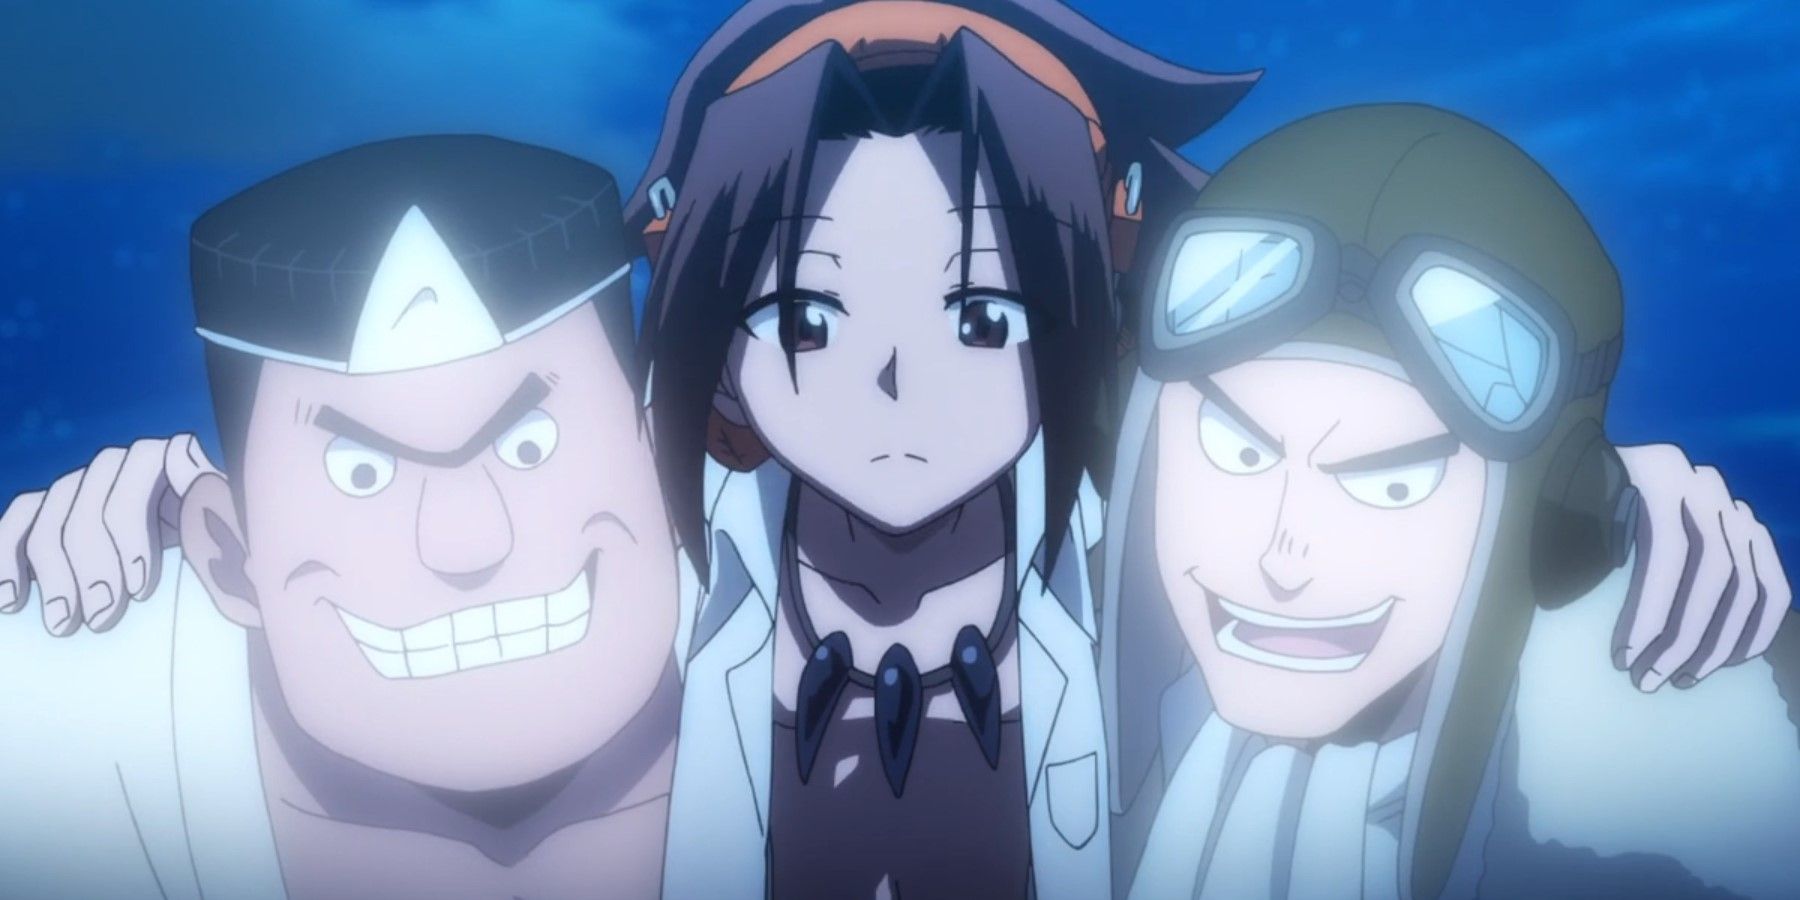 Shaman King Yoh hanging with two ghosts